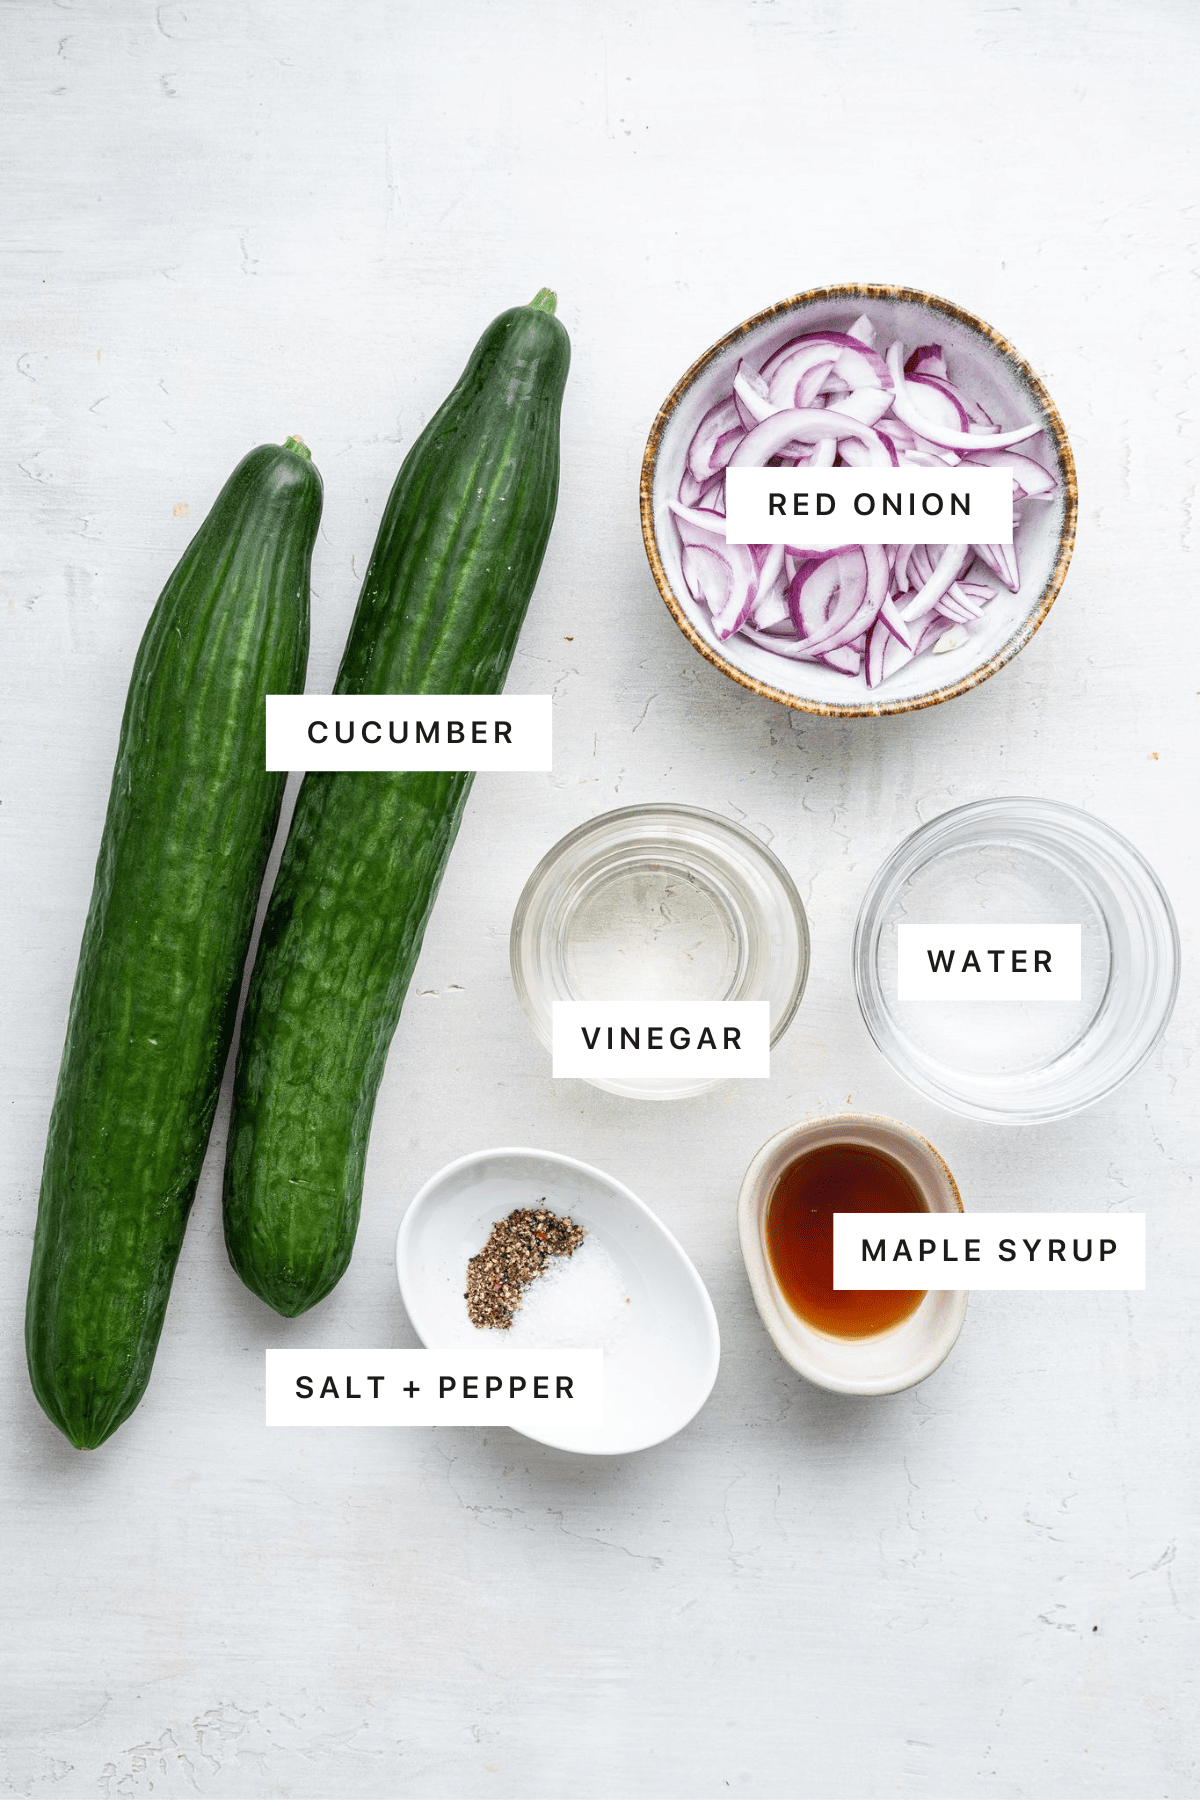 Ingredients measured out to make Easy Cucumber Salad: cucumber, red onion, vinegar, water, salt, pepper and maple syrup.